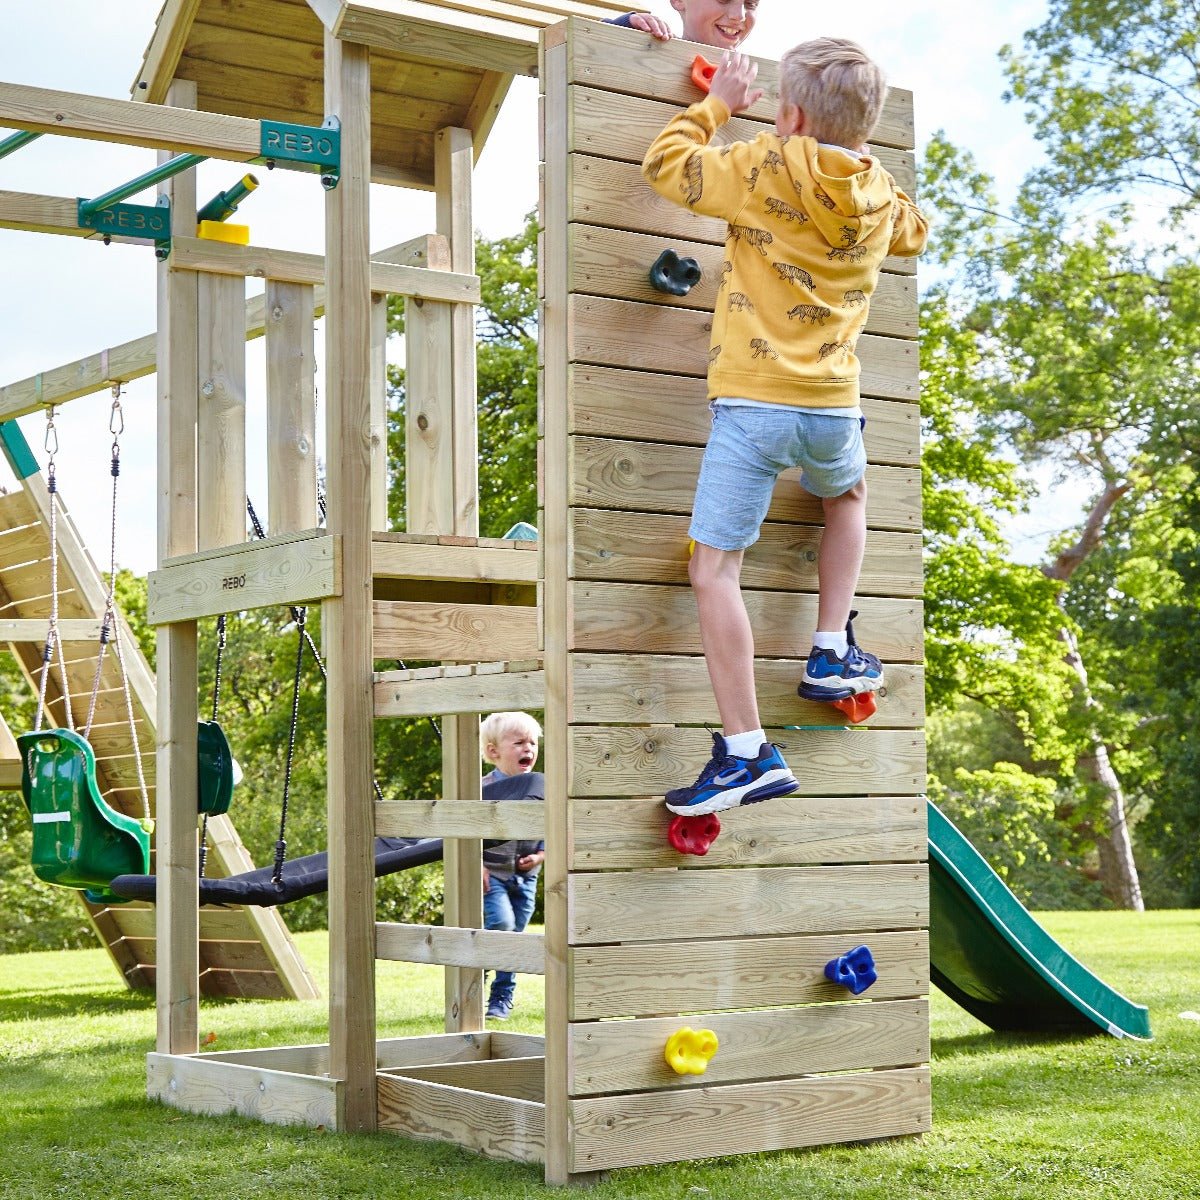 Rebo Wooden Climbing Frame with Vertical Rock Wall, Swing Set and Slide - Dolomite+